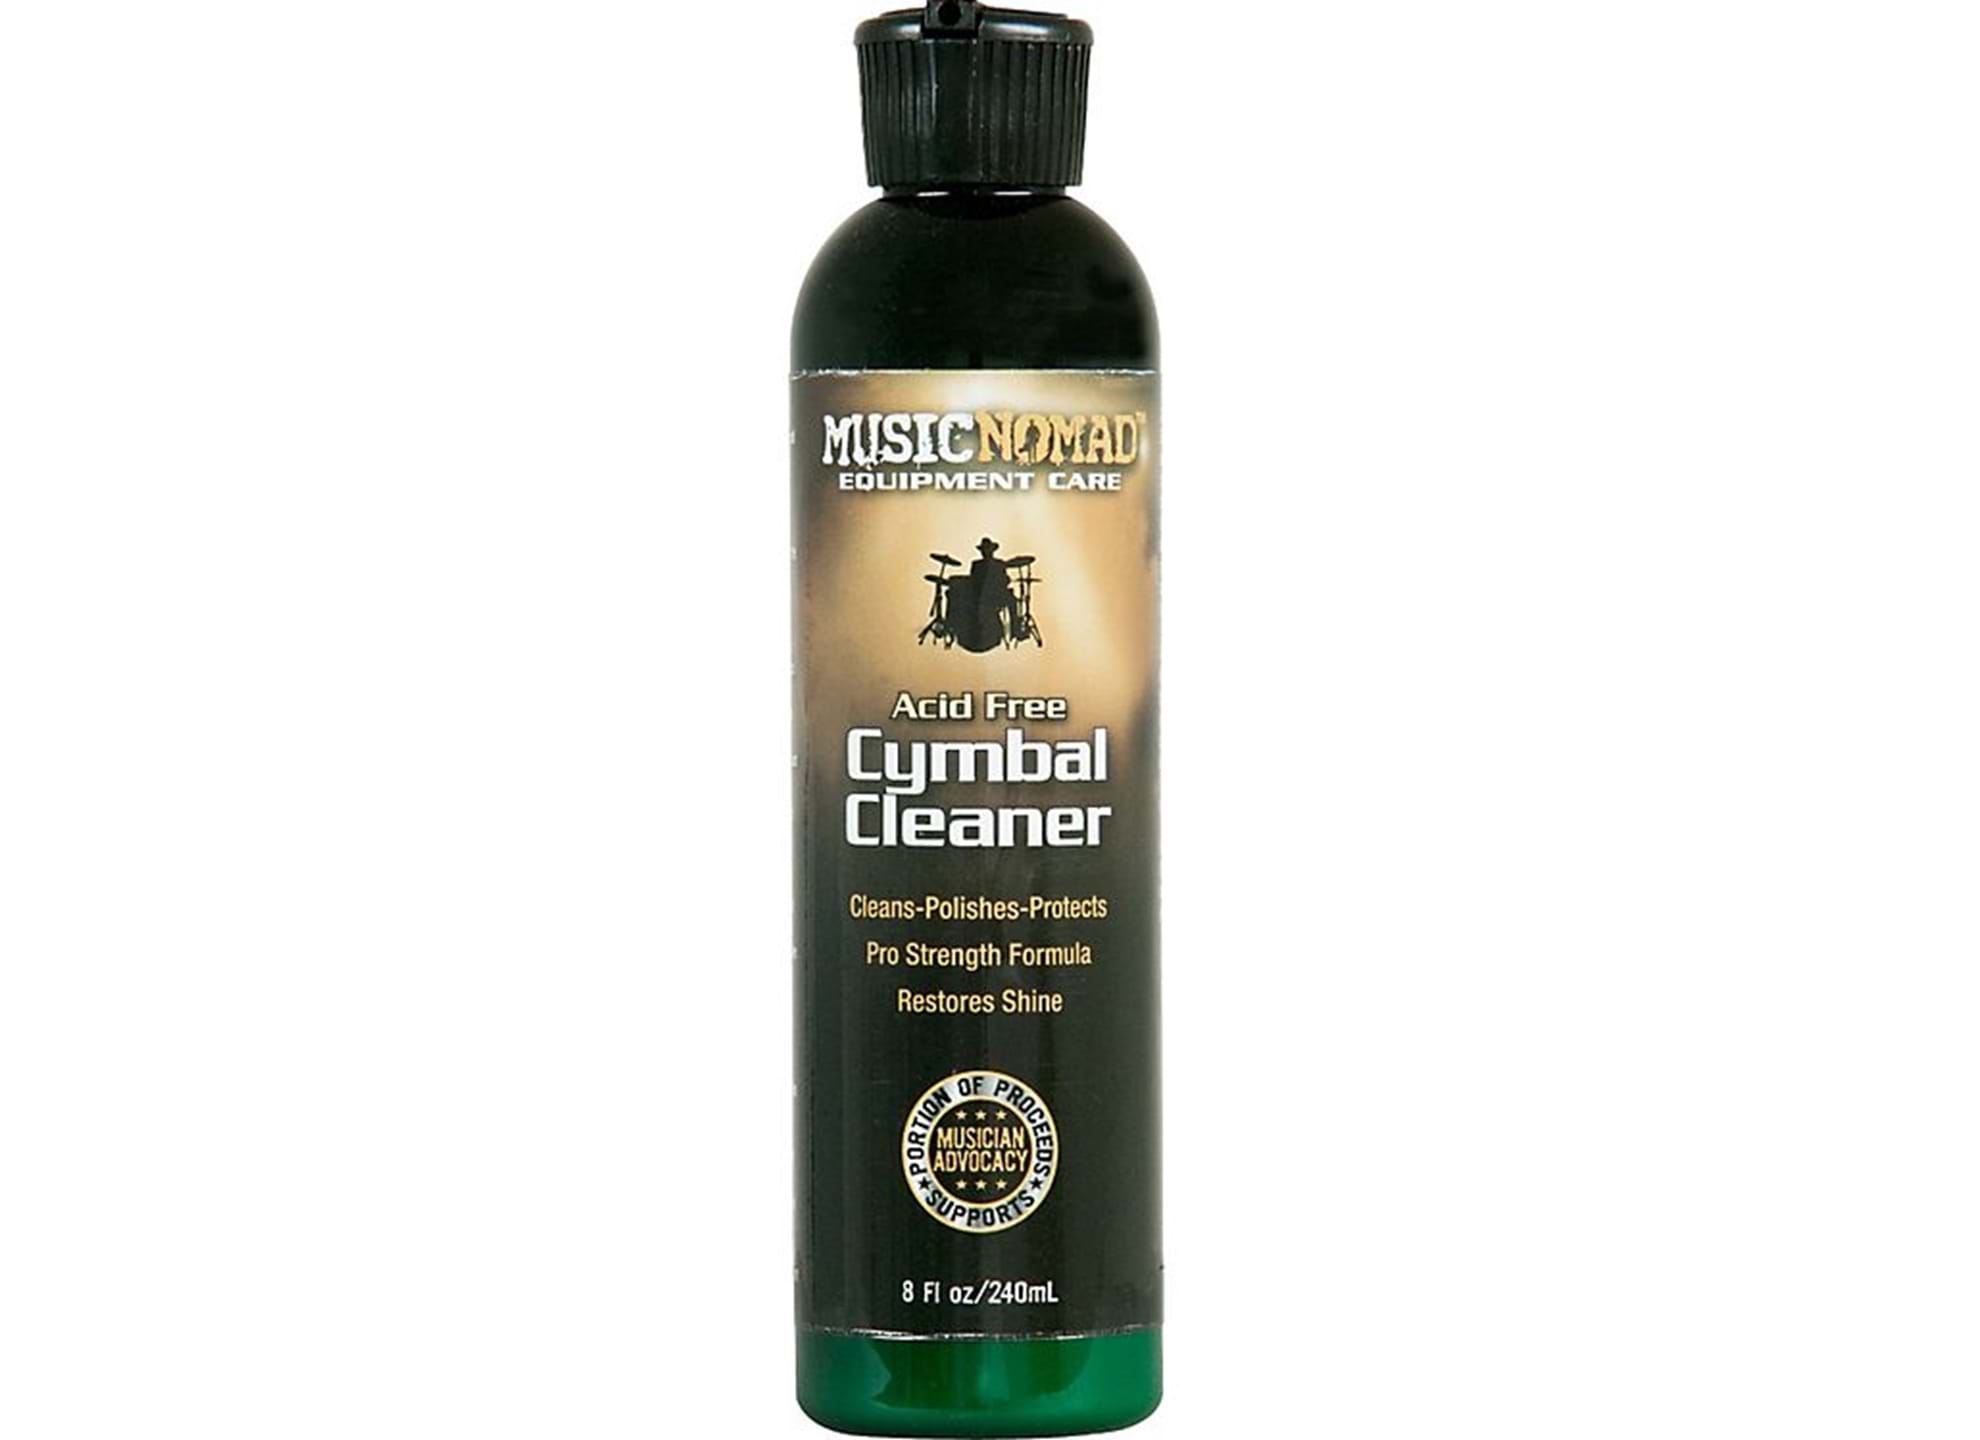 Cymbal Cleaner